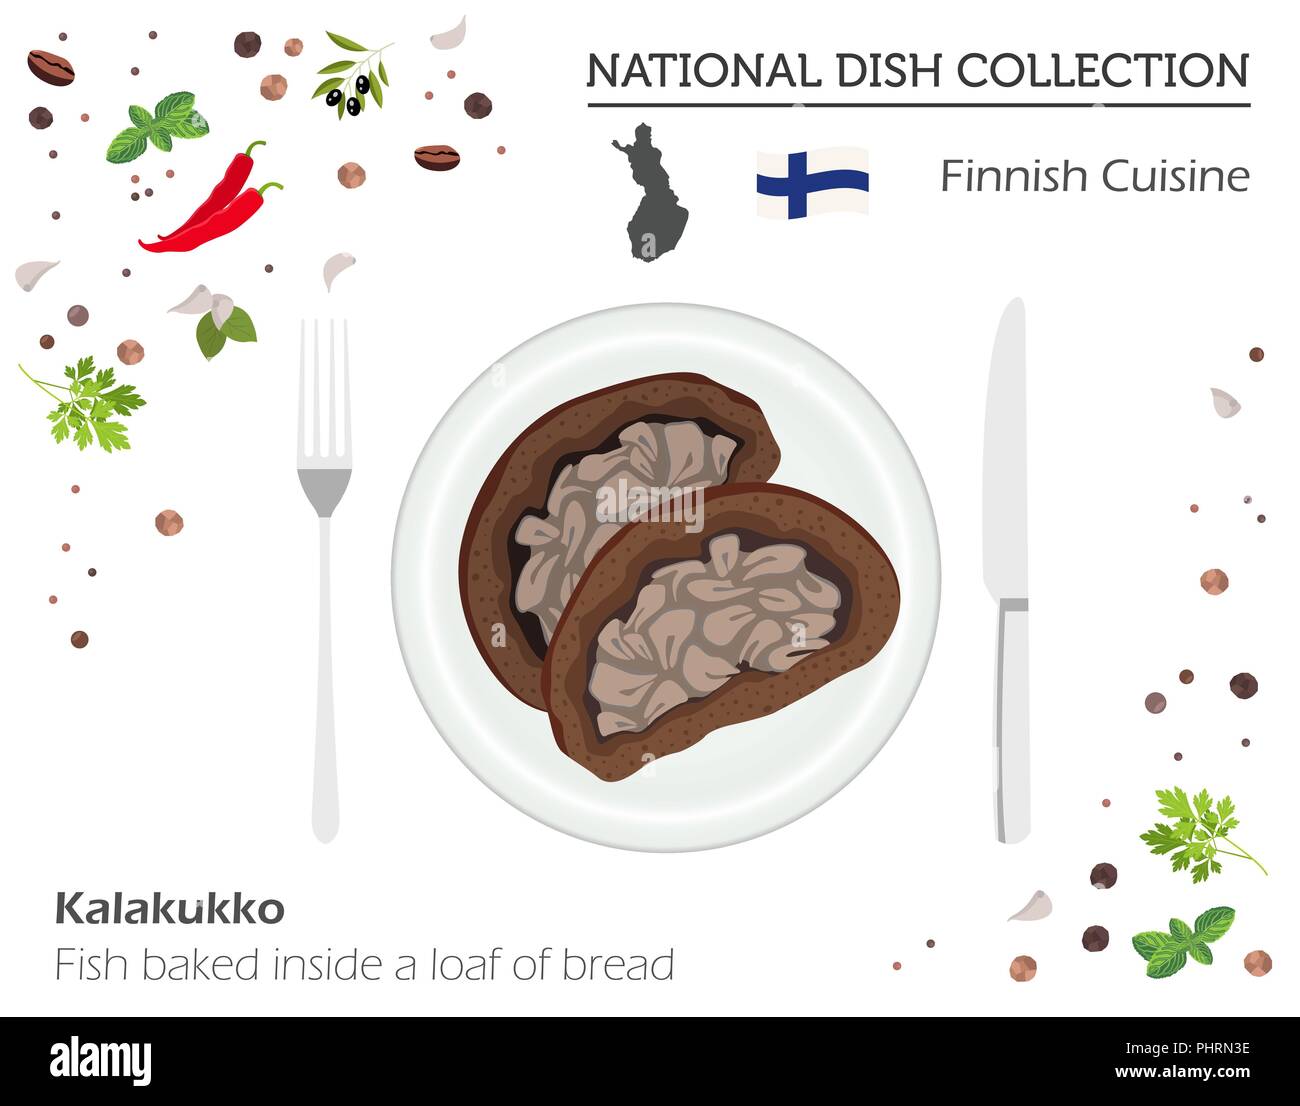 Finnish Cuisine. European national dish collection. Fish baked inside a loaf of bread  isolated on white, infographic. Vector illustration Stock Vector